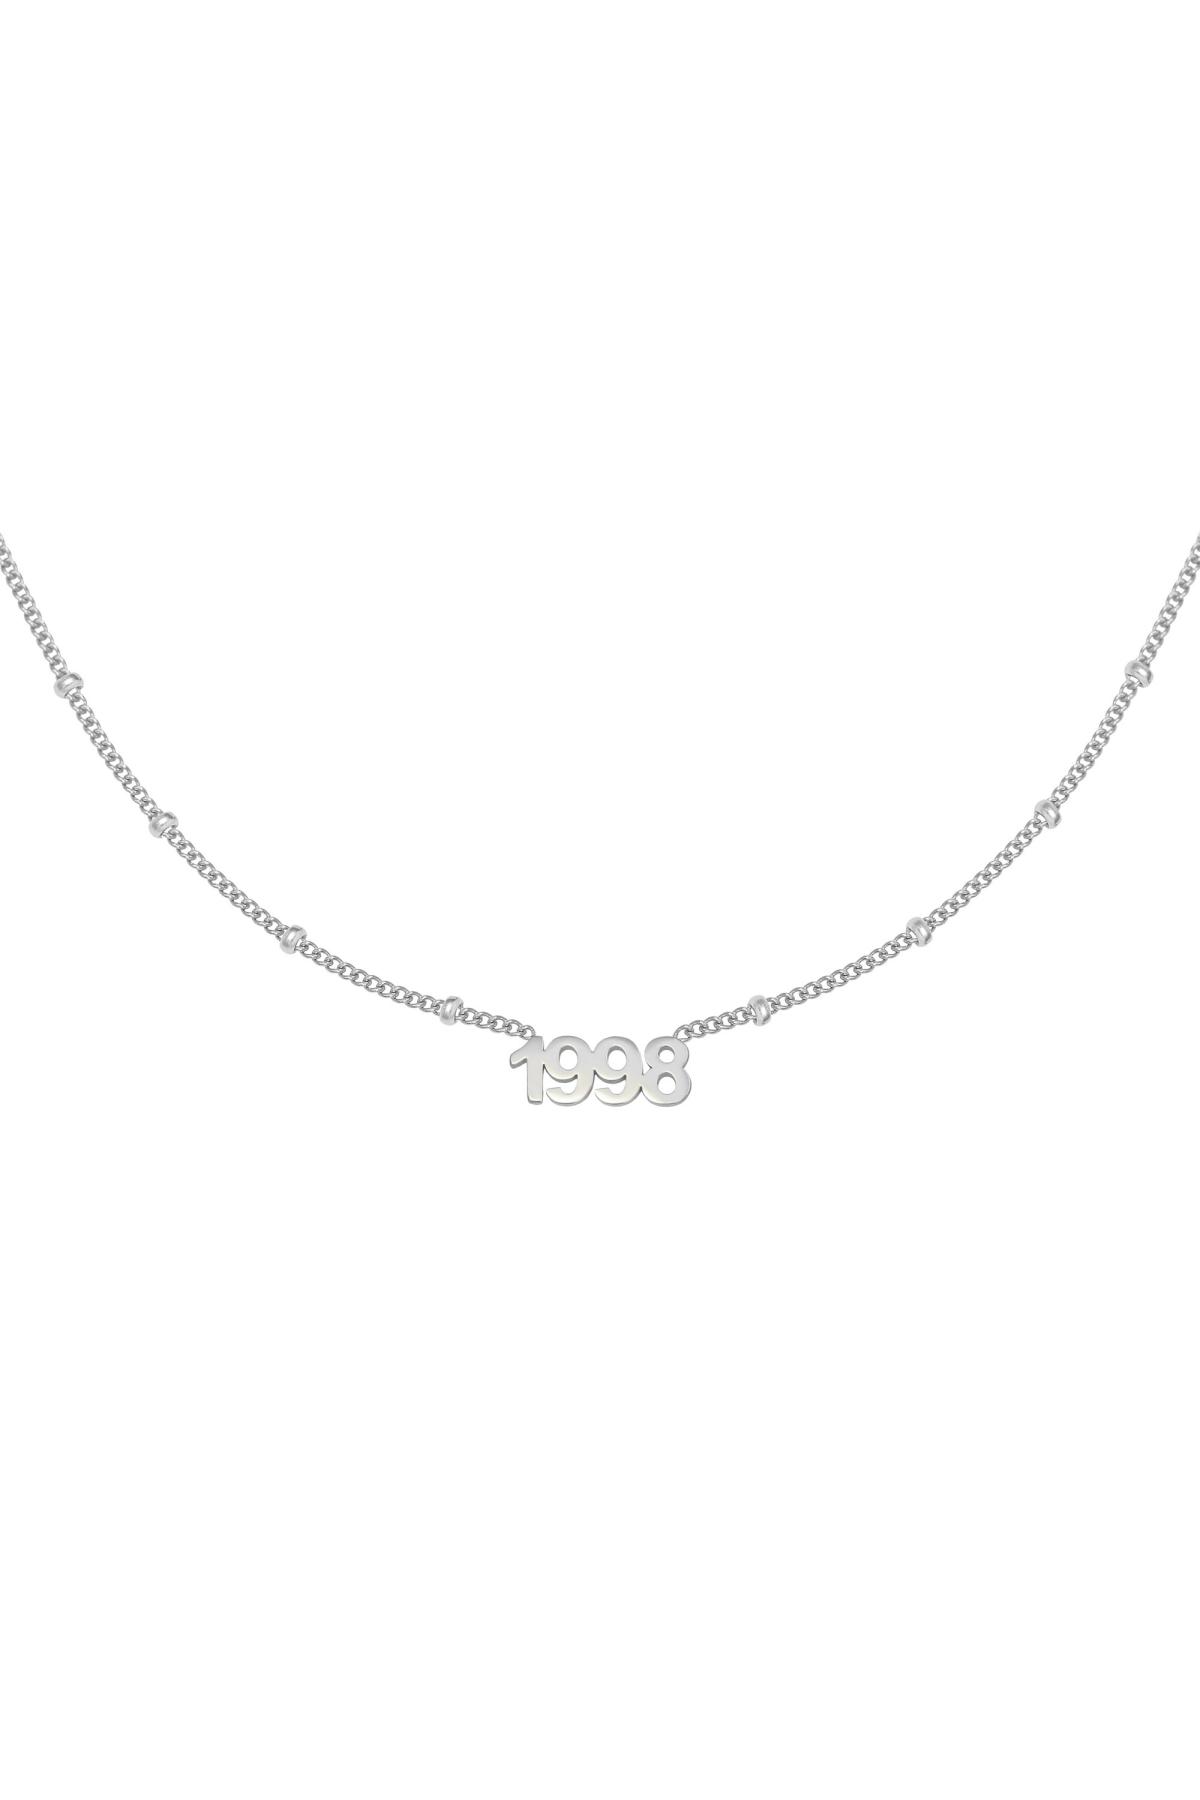 Necklace Year 1998 Silver Stainless Steel h5 